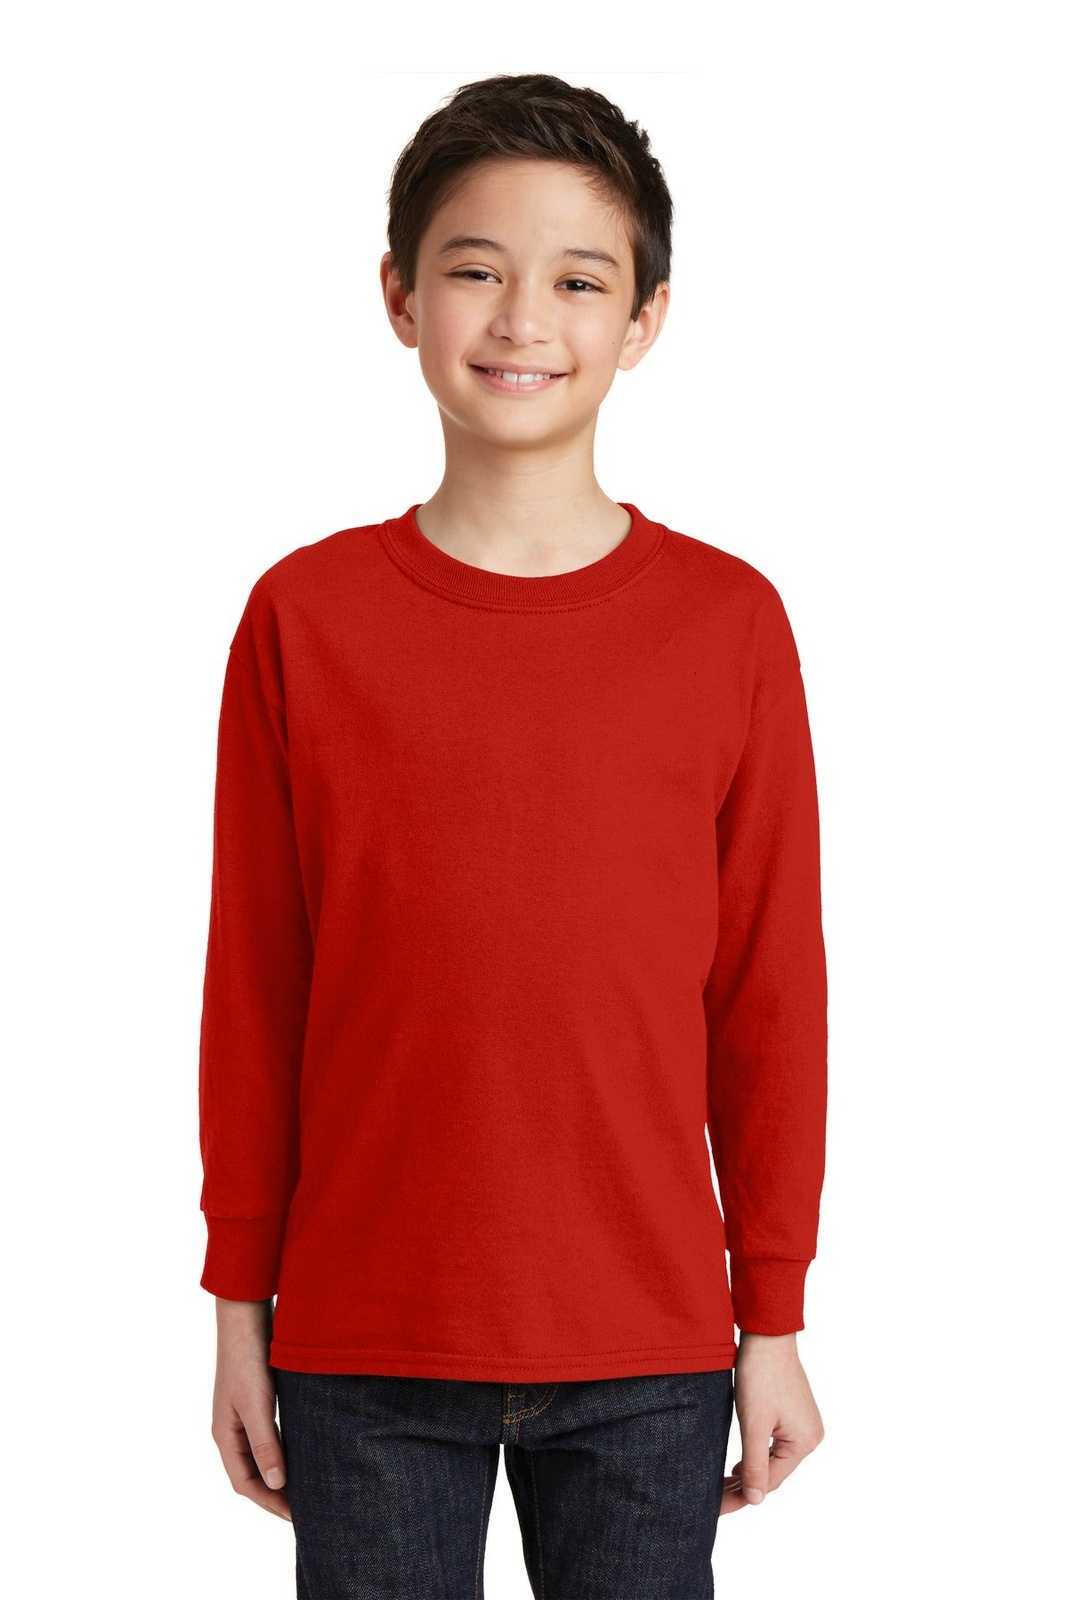 Gildan 5400B Youth Heavy Cotton 100% Cotton Long Sleeve T-Shirt - Red - HIT a Double